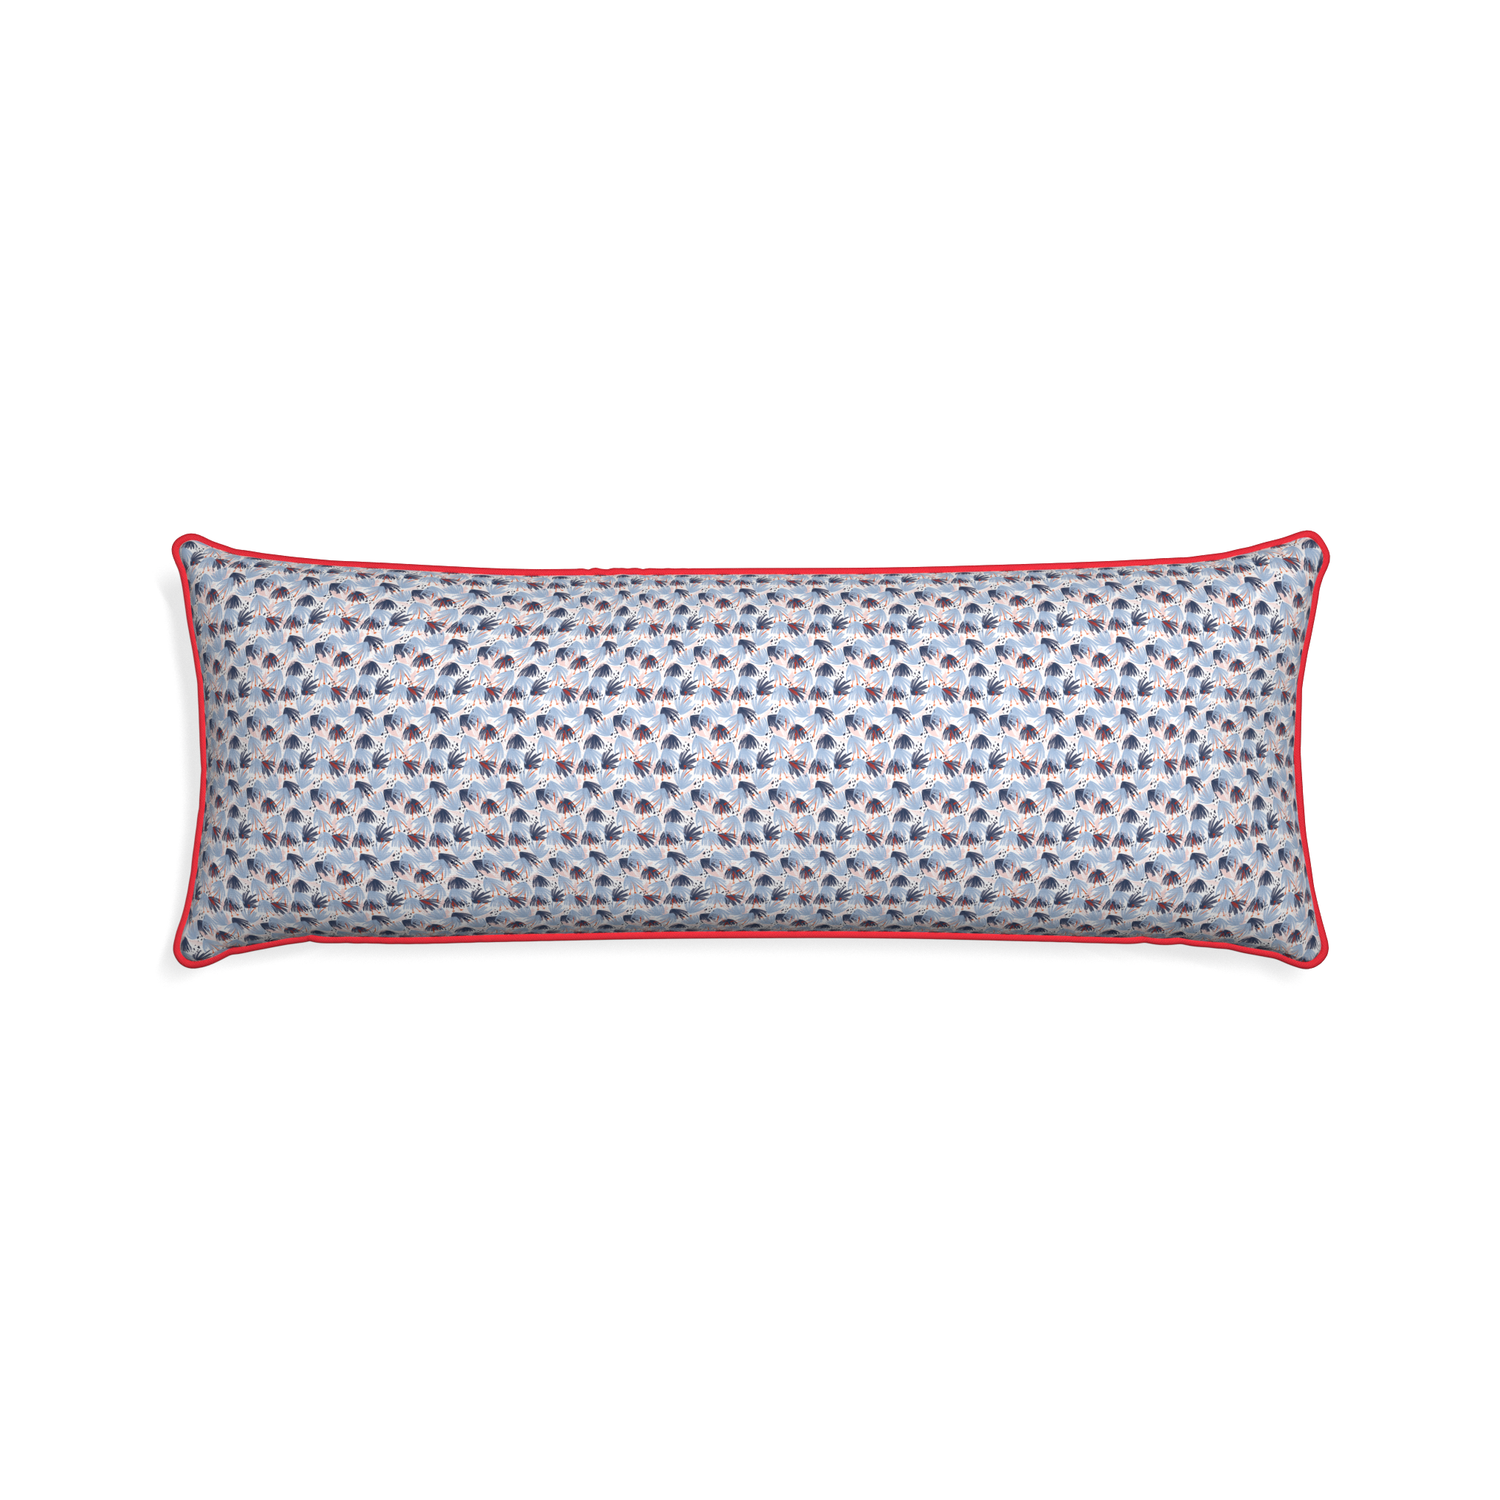 Xl-lumbar eden blue custom red and bluepillow with cherry piping on white background